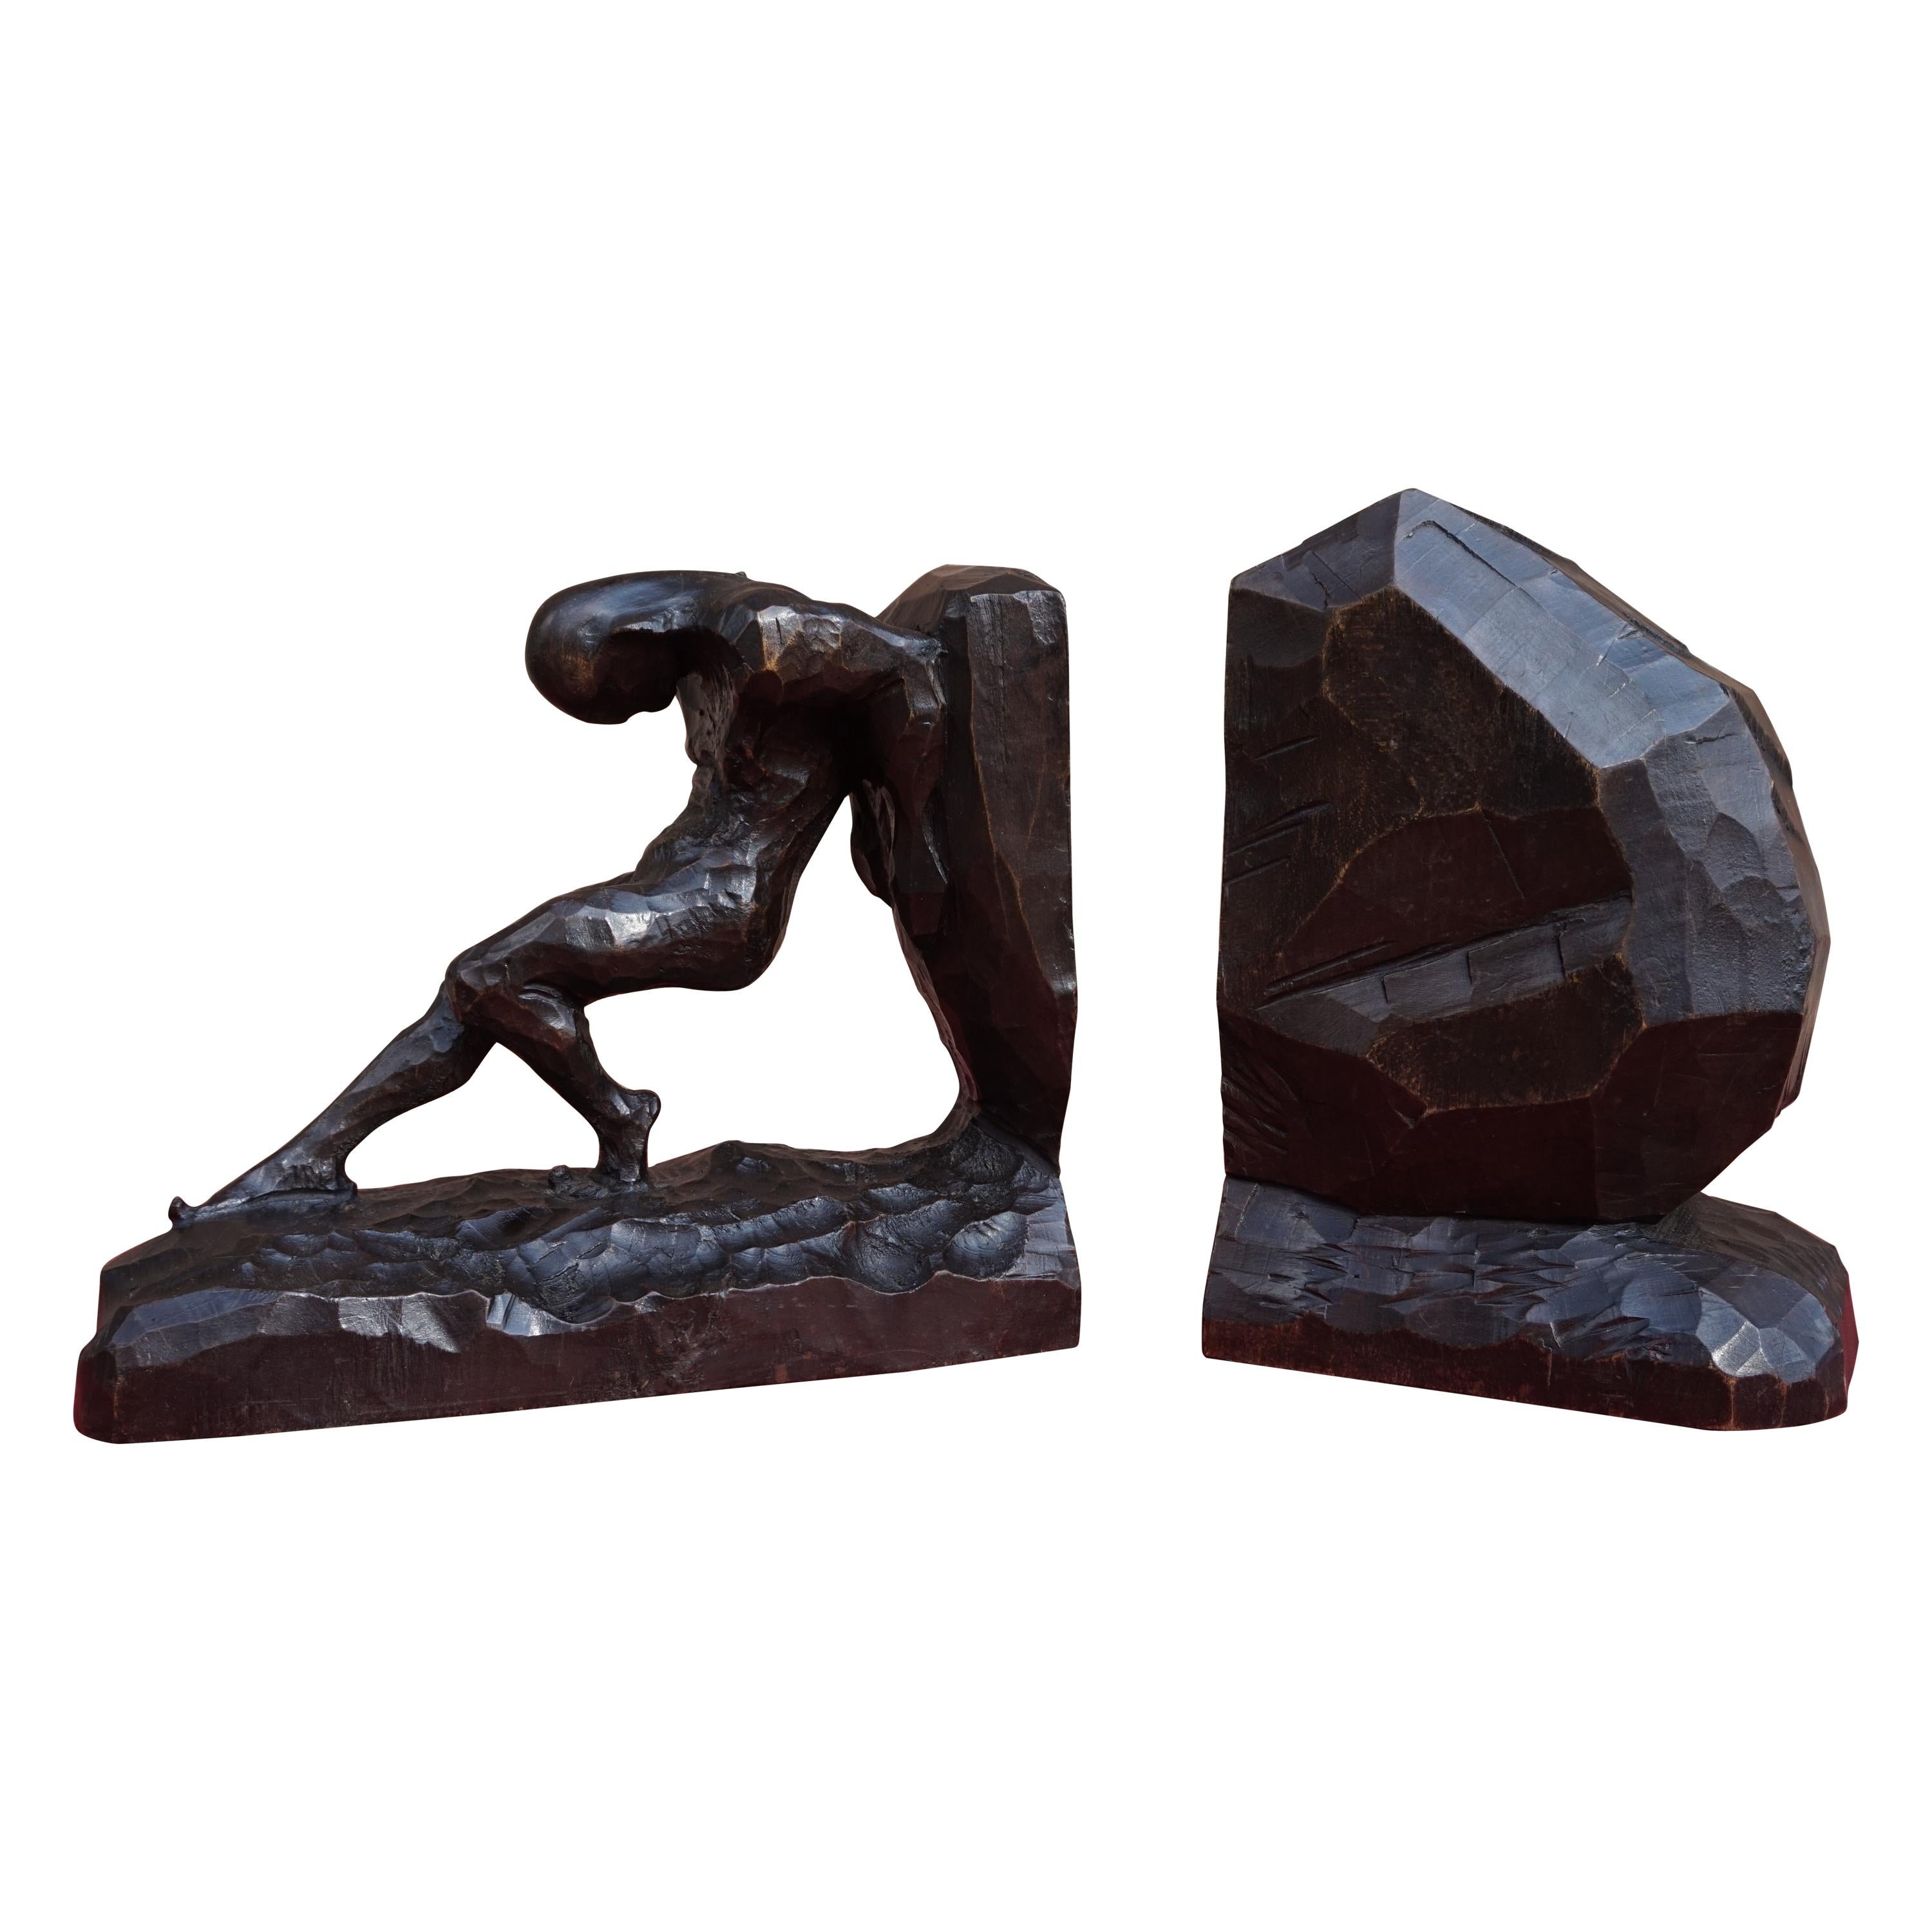 Striking and Hand Carved Art Deco Athletic Nude Male and Rock Sculpture Bookends